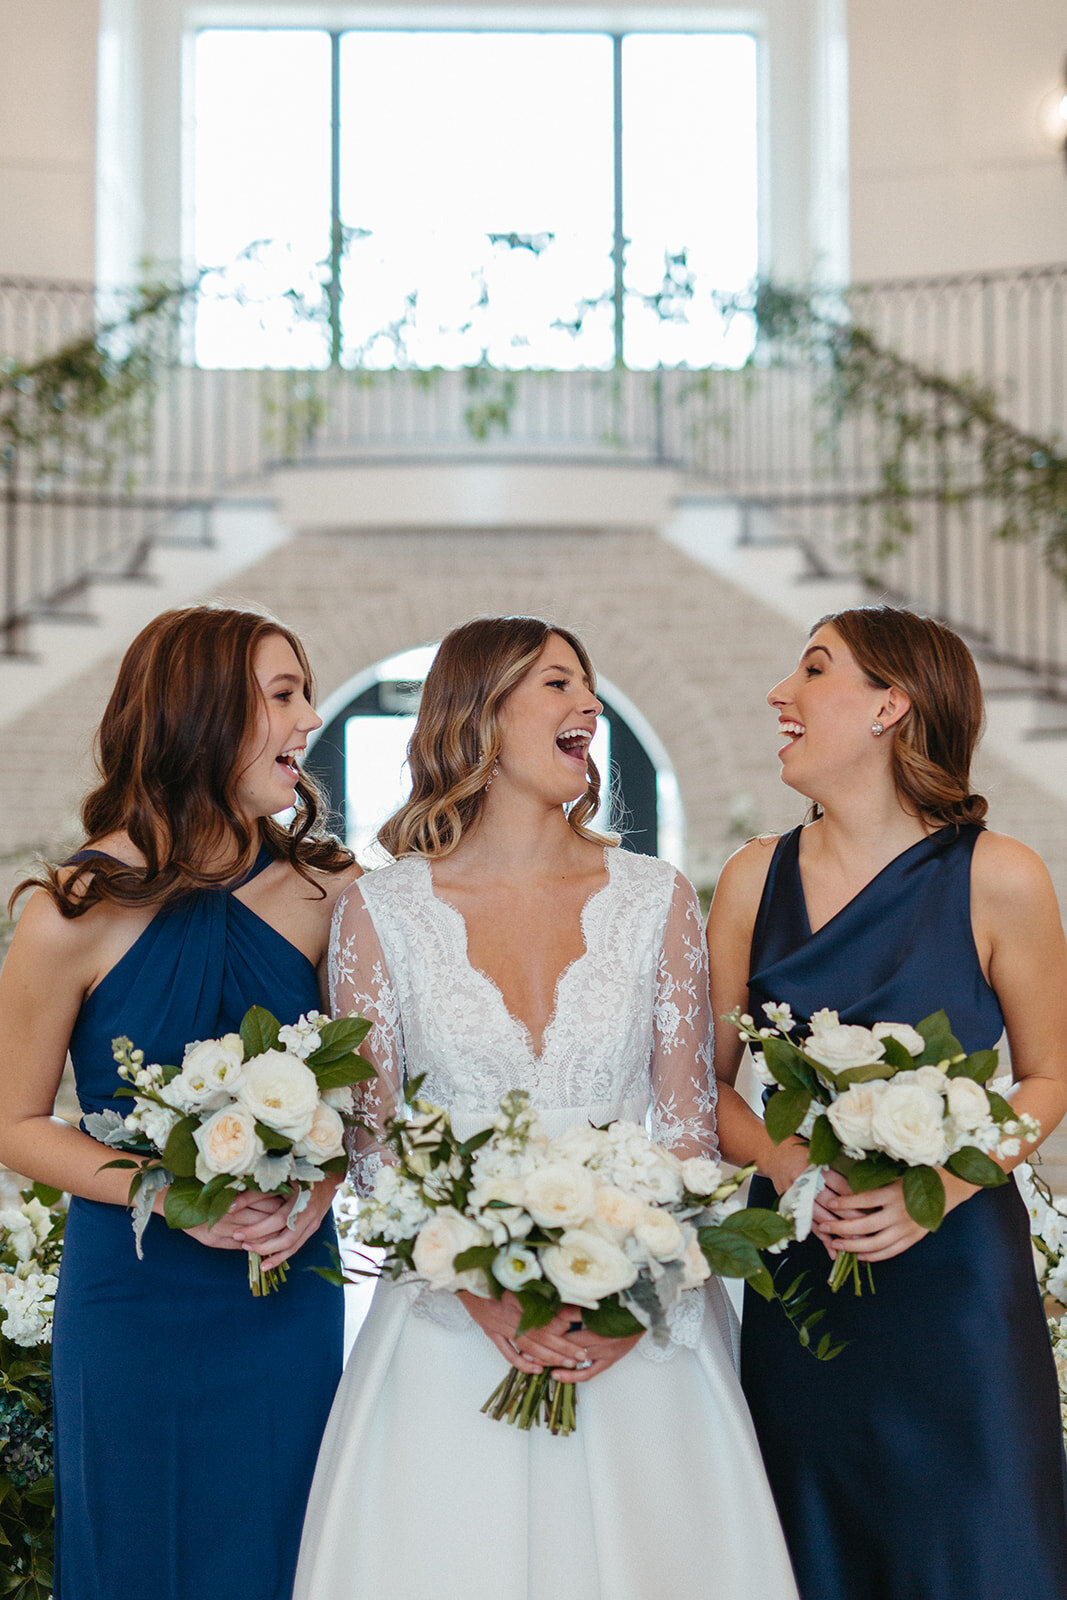 A bride in a white wedding gown holding a white bouquet smiles between two bridesmaids wearing blue satin gowns.